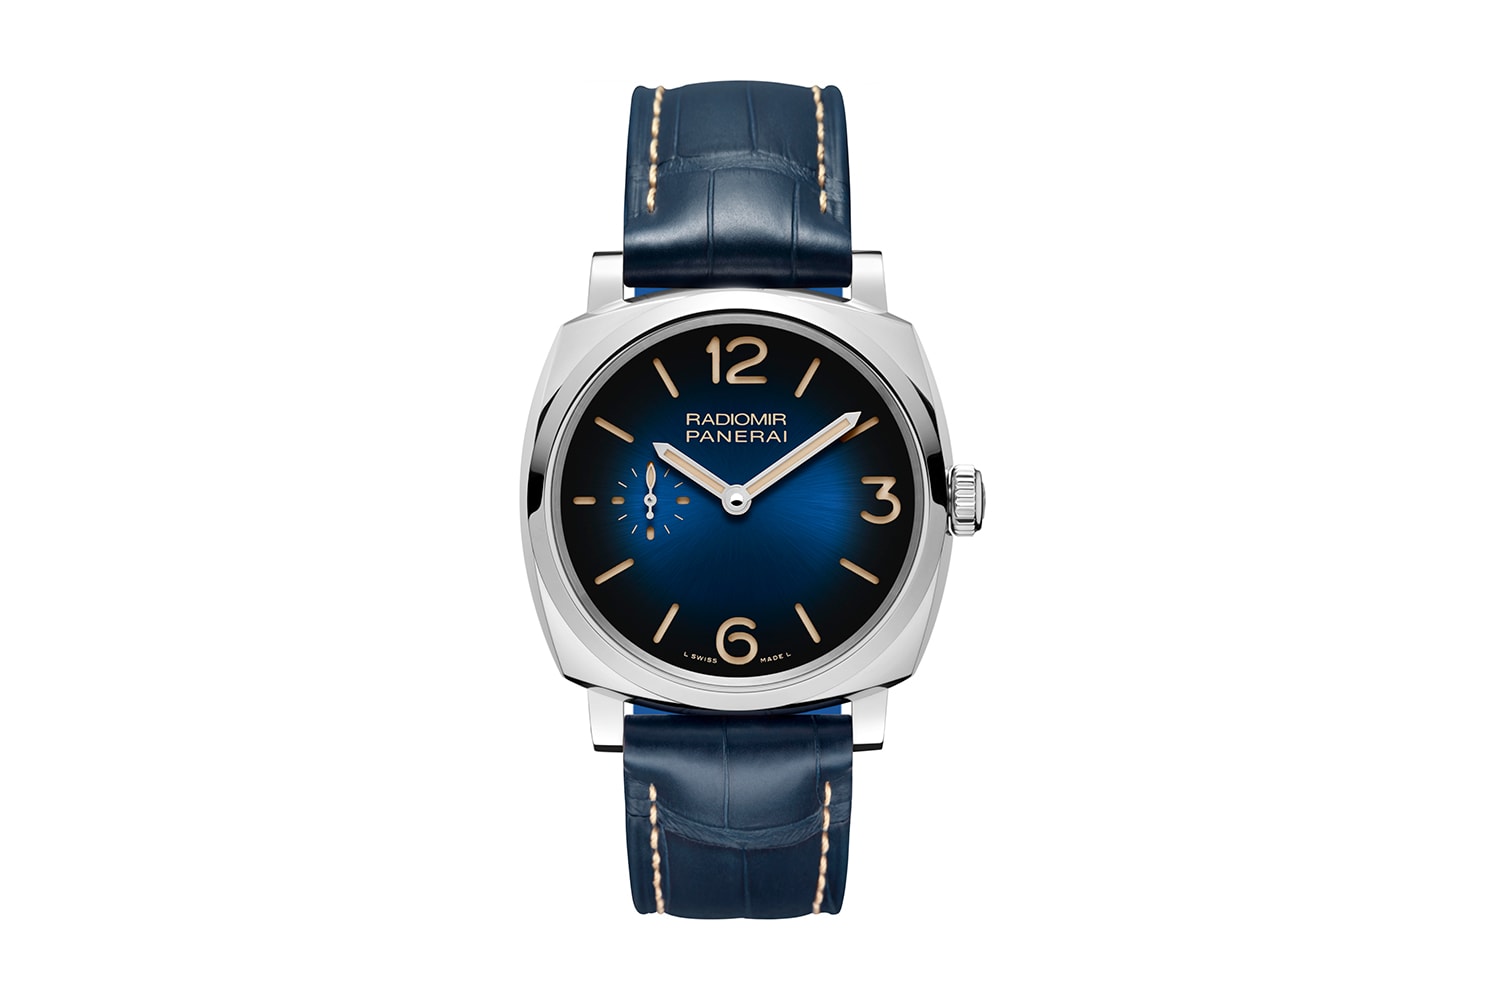 Panerai Radiomir Mediterraneo Collection Info watches Italian carbon dive watches military 